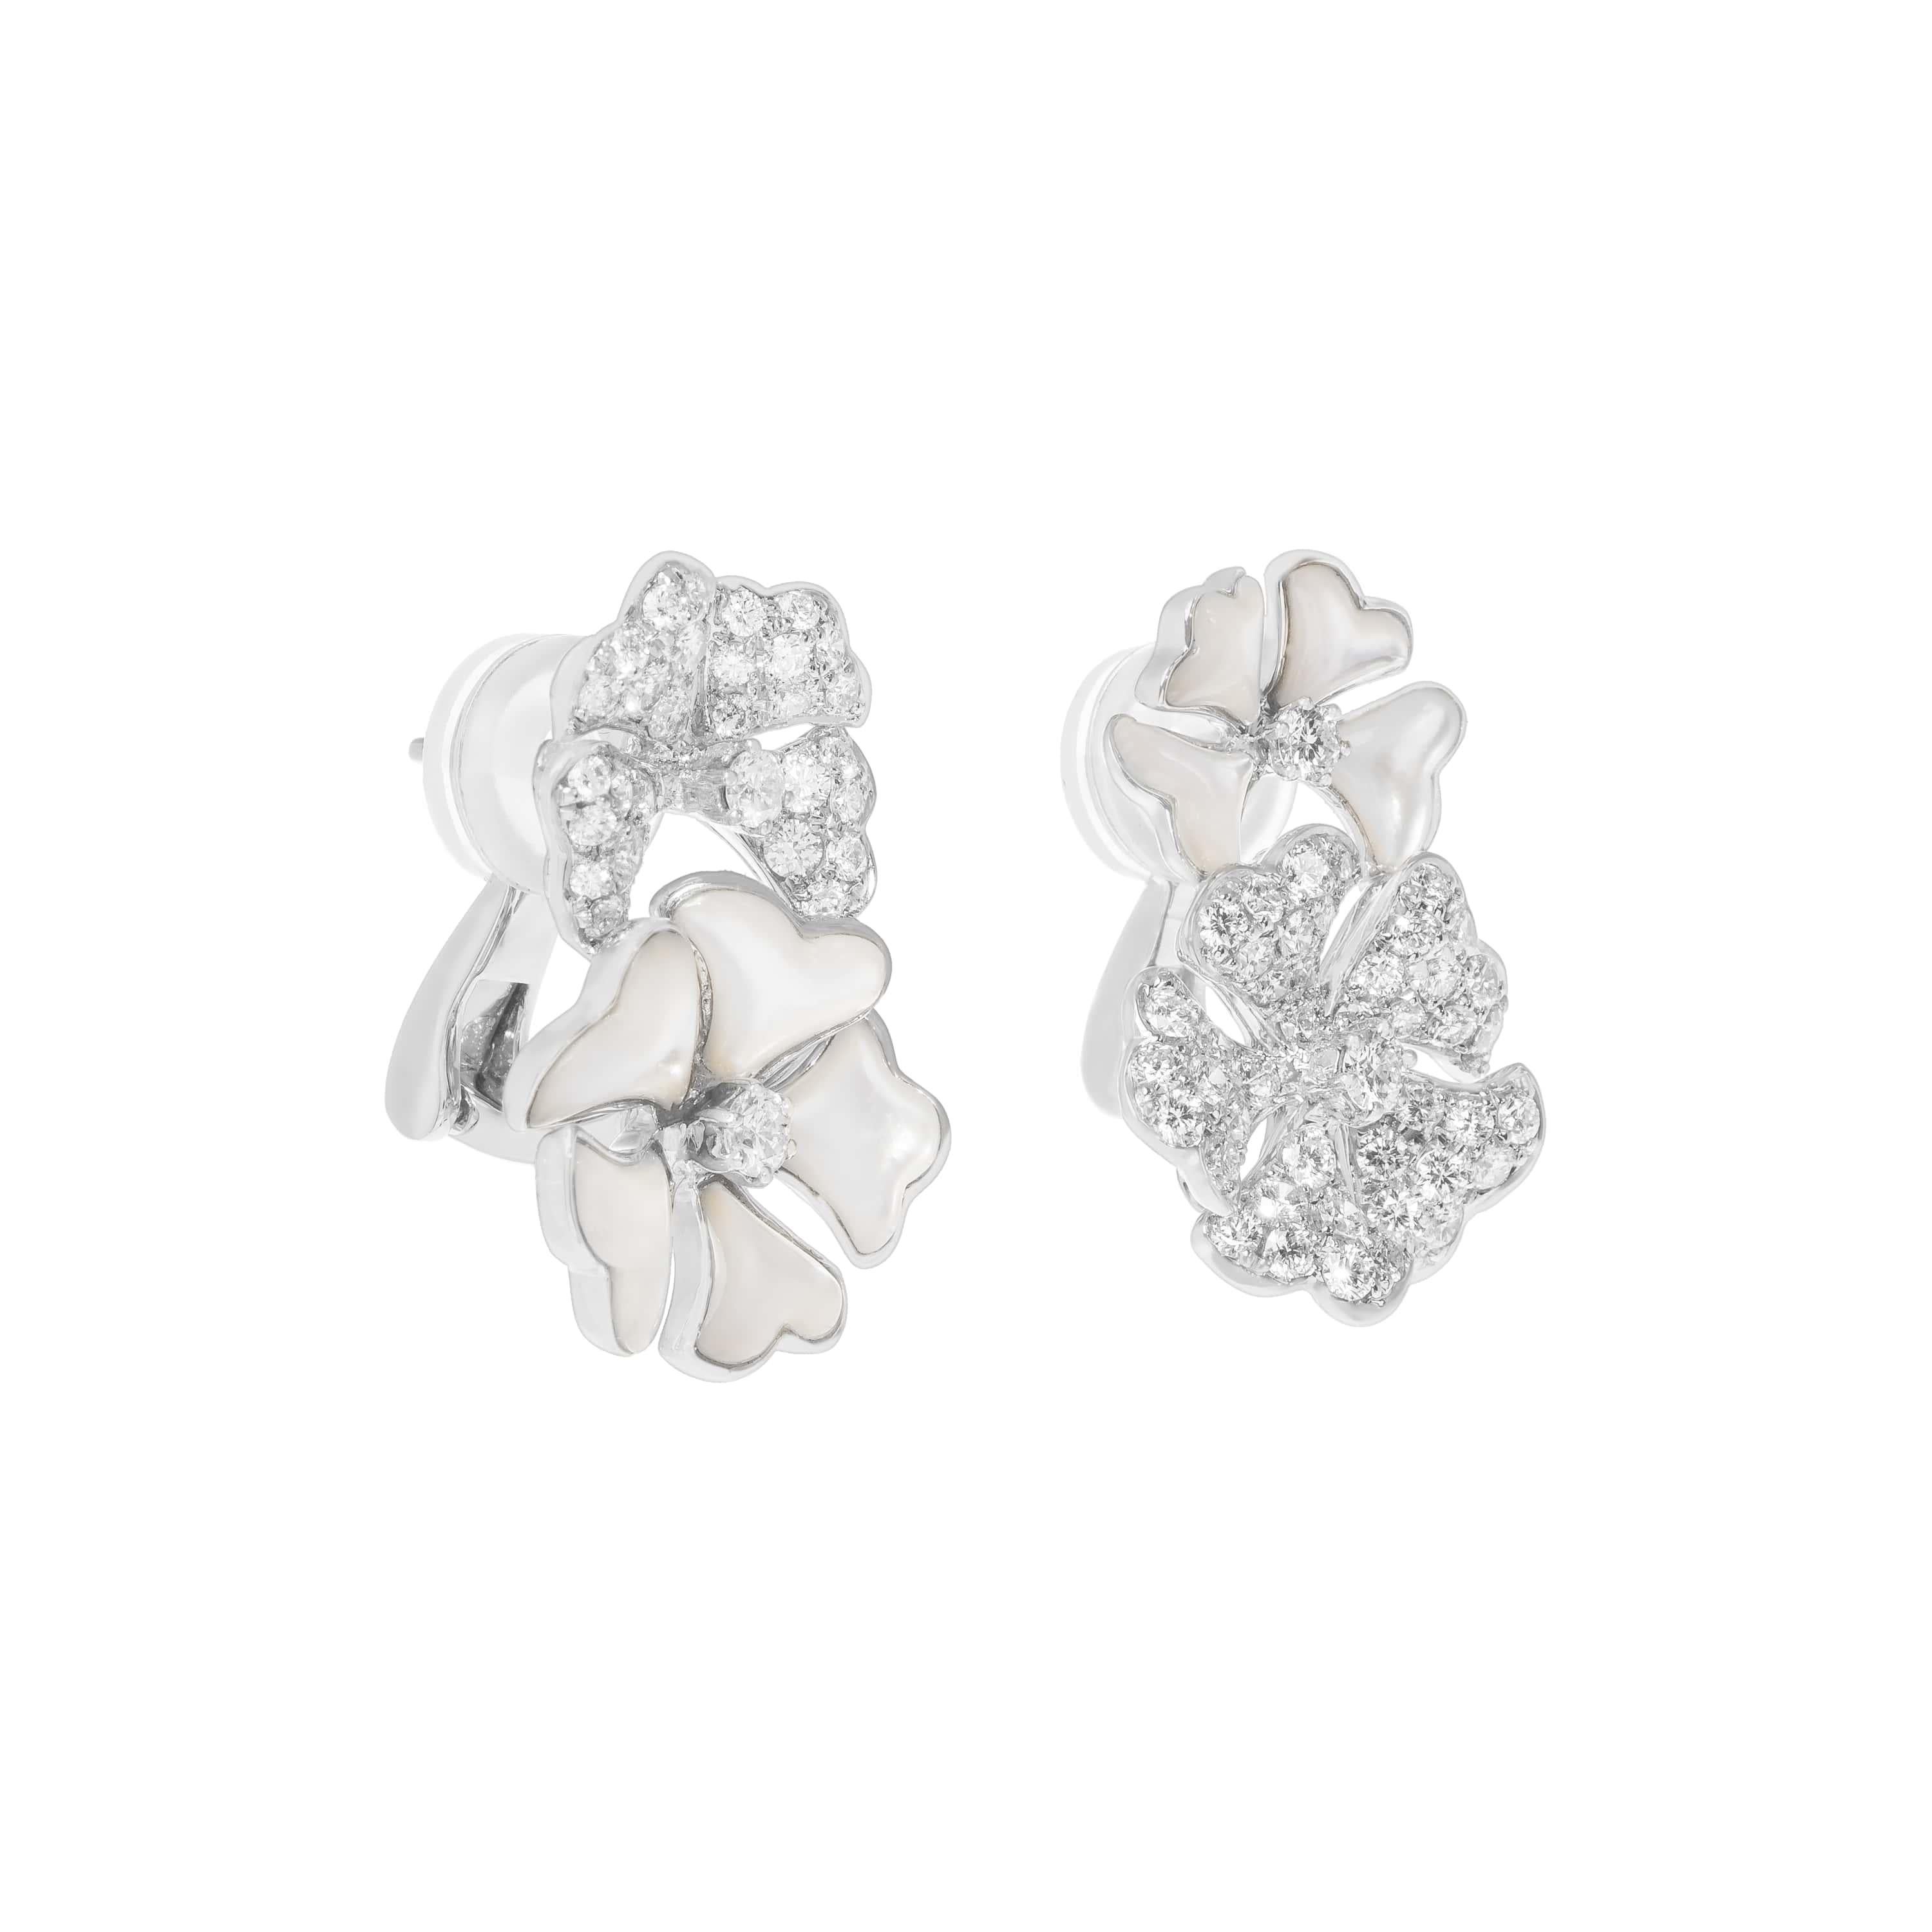 Bloom Diamond and White Mother-of-Pearl Double Bloom Earrings in 18K White Gold

Inspired by the exquisite petals of the alpine cinquefoil, the Bloom collection contrasts the richness of diamonds and precious metals with the light versatility of